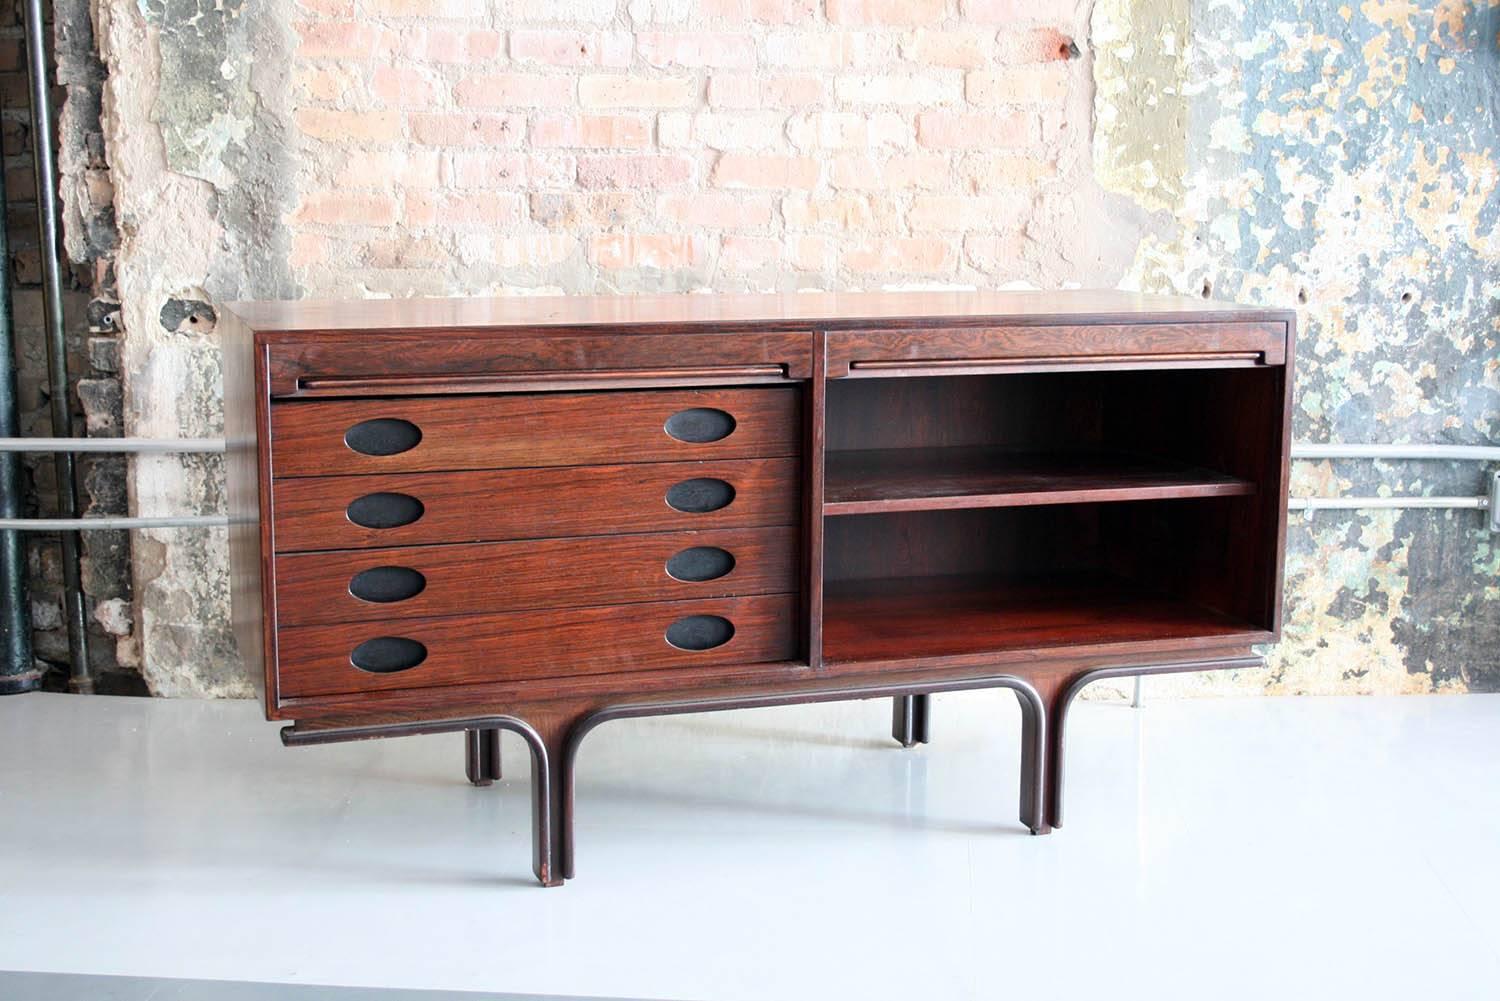 Small rosewood sideboard by Gianfranco Frattini for Bernini Italy
Rosewood sideboard with tambour doors designed in 1957 by Gianfranco Frattini for Bernini, Italy. Two spaces with internal drawers on left and shelves on the right. Two available.